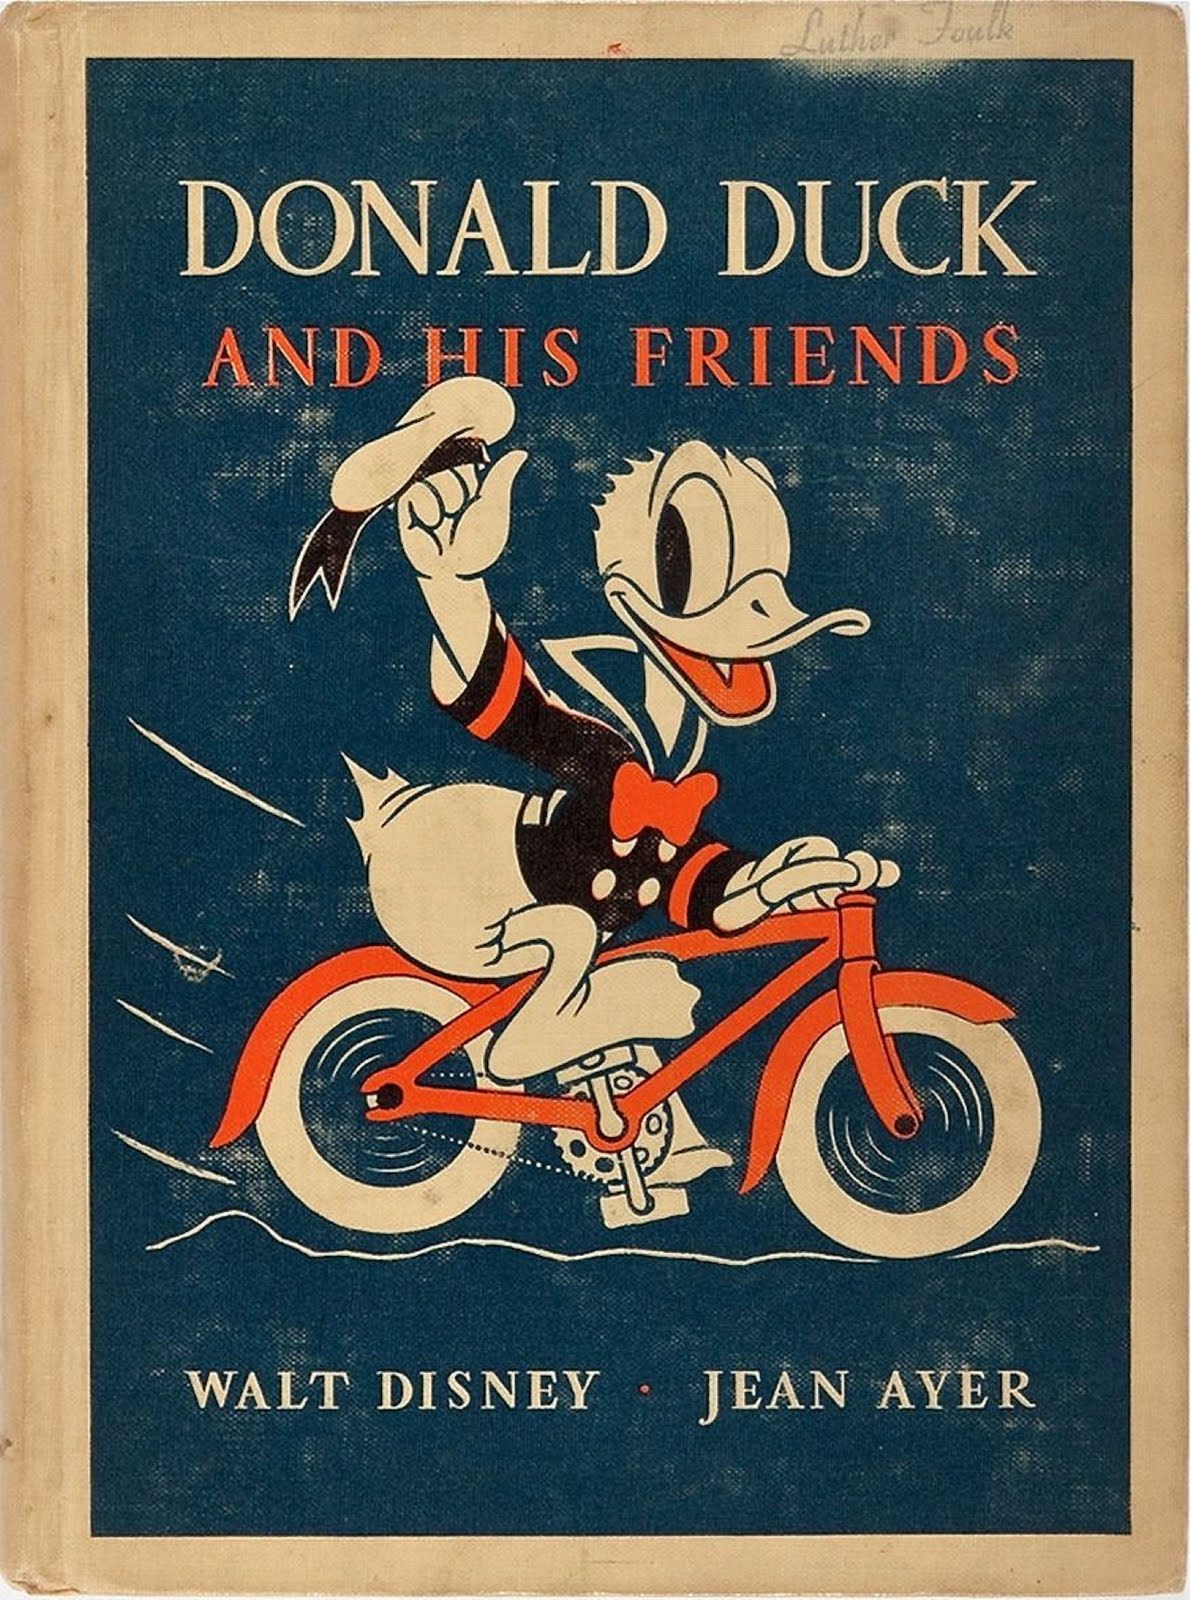 DONALD DUCK AND HIS FRIENDS